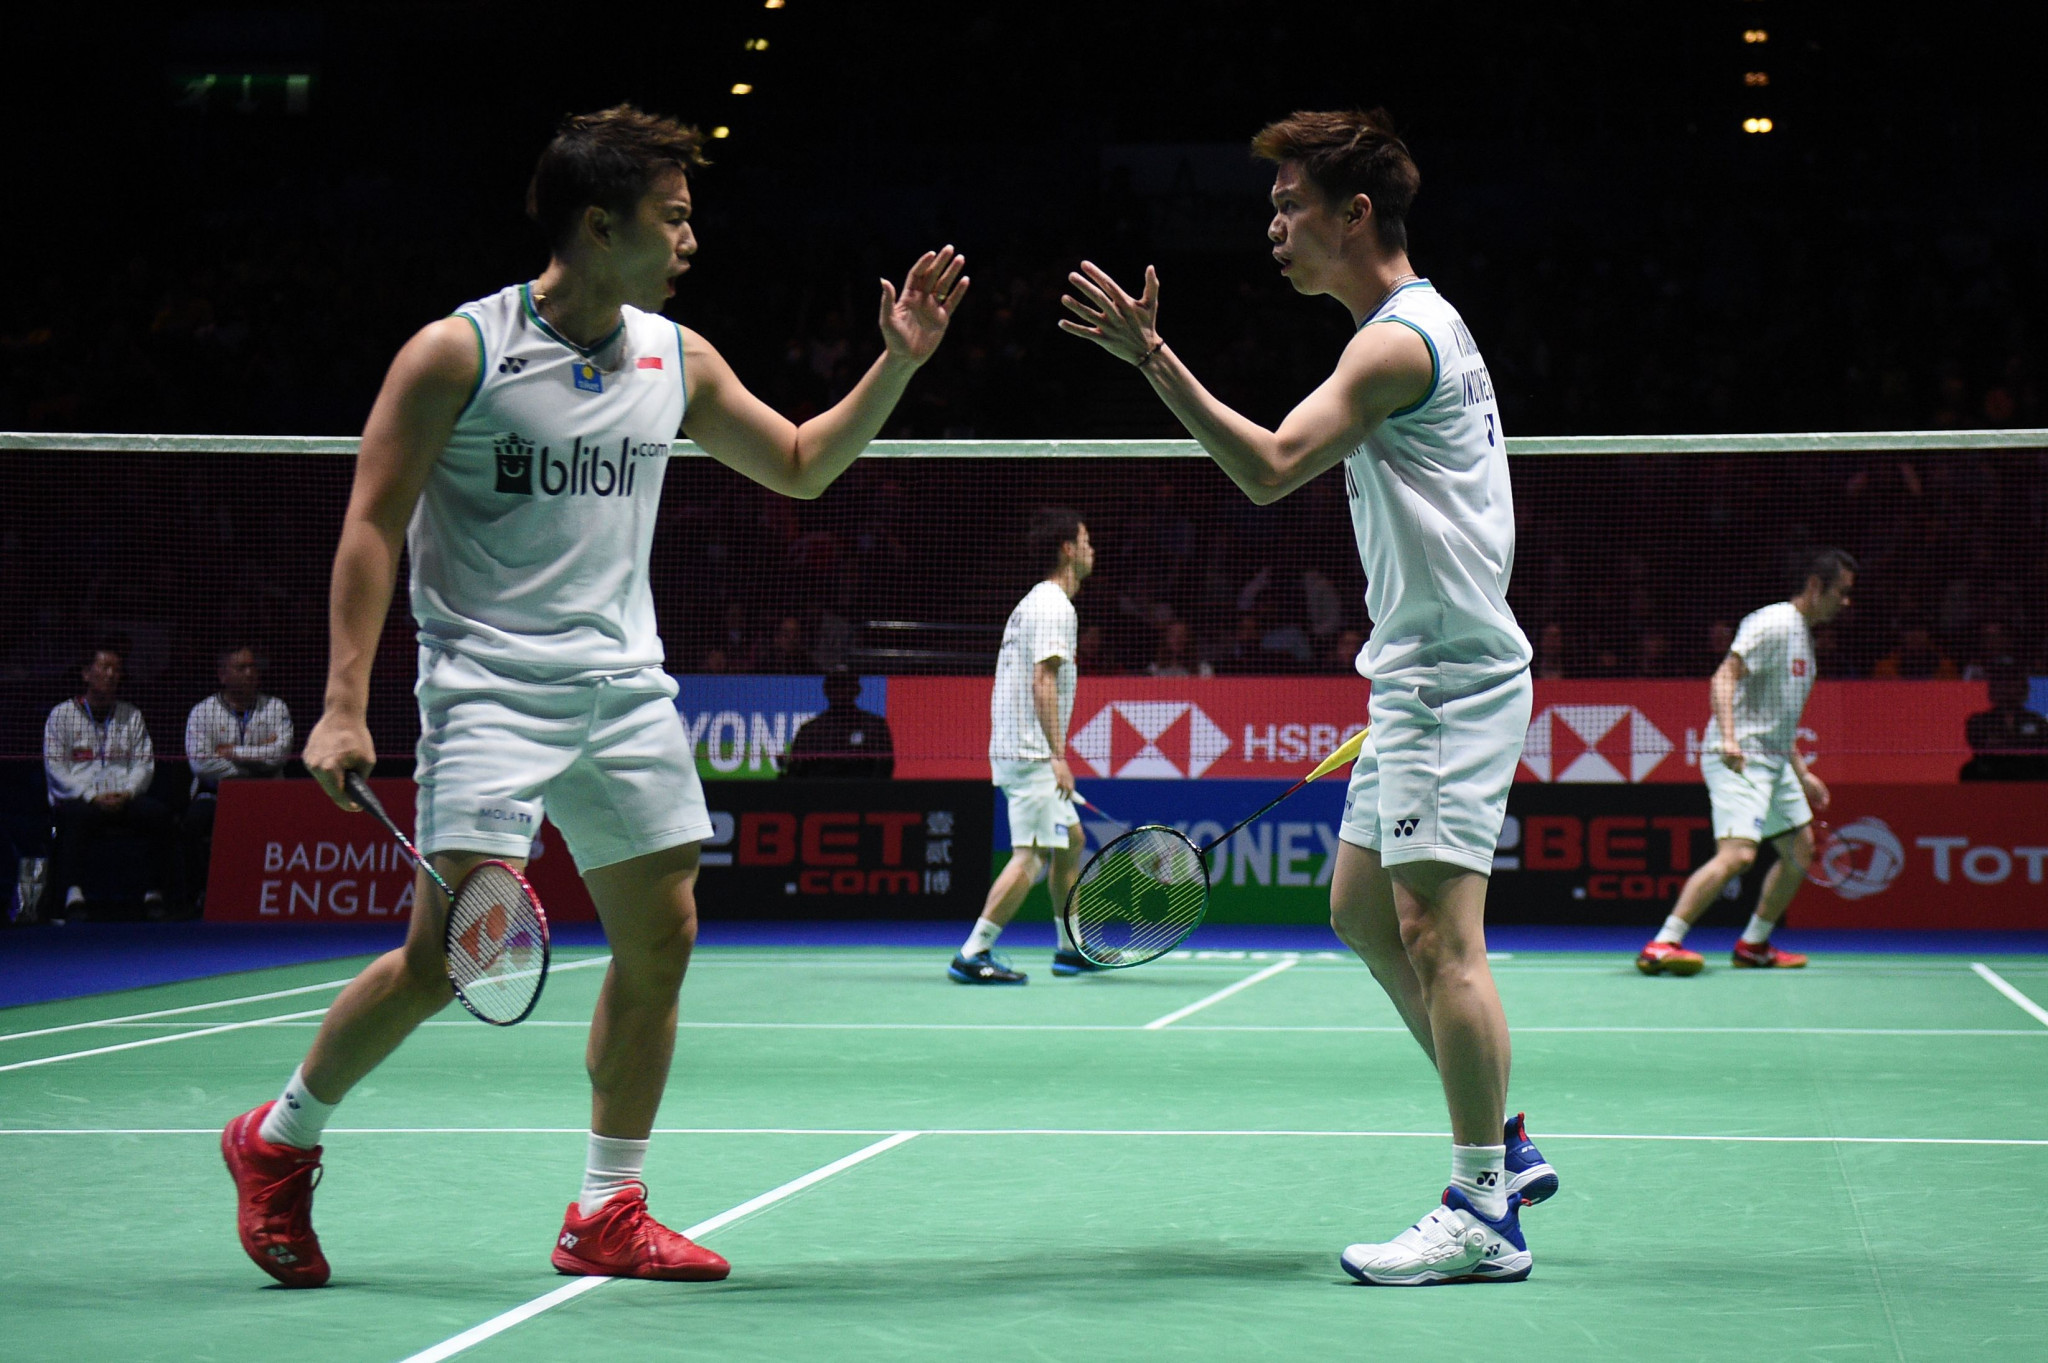 World number one doubles pair withdraw from BWF World Tour Finals after positive COVID-19 test